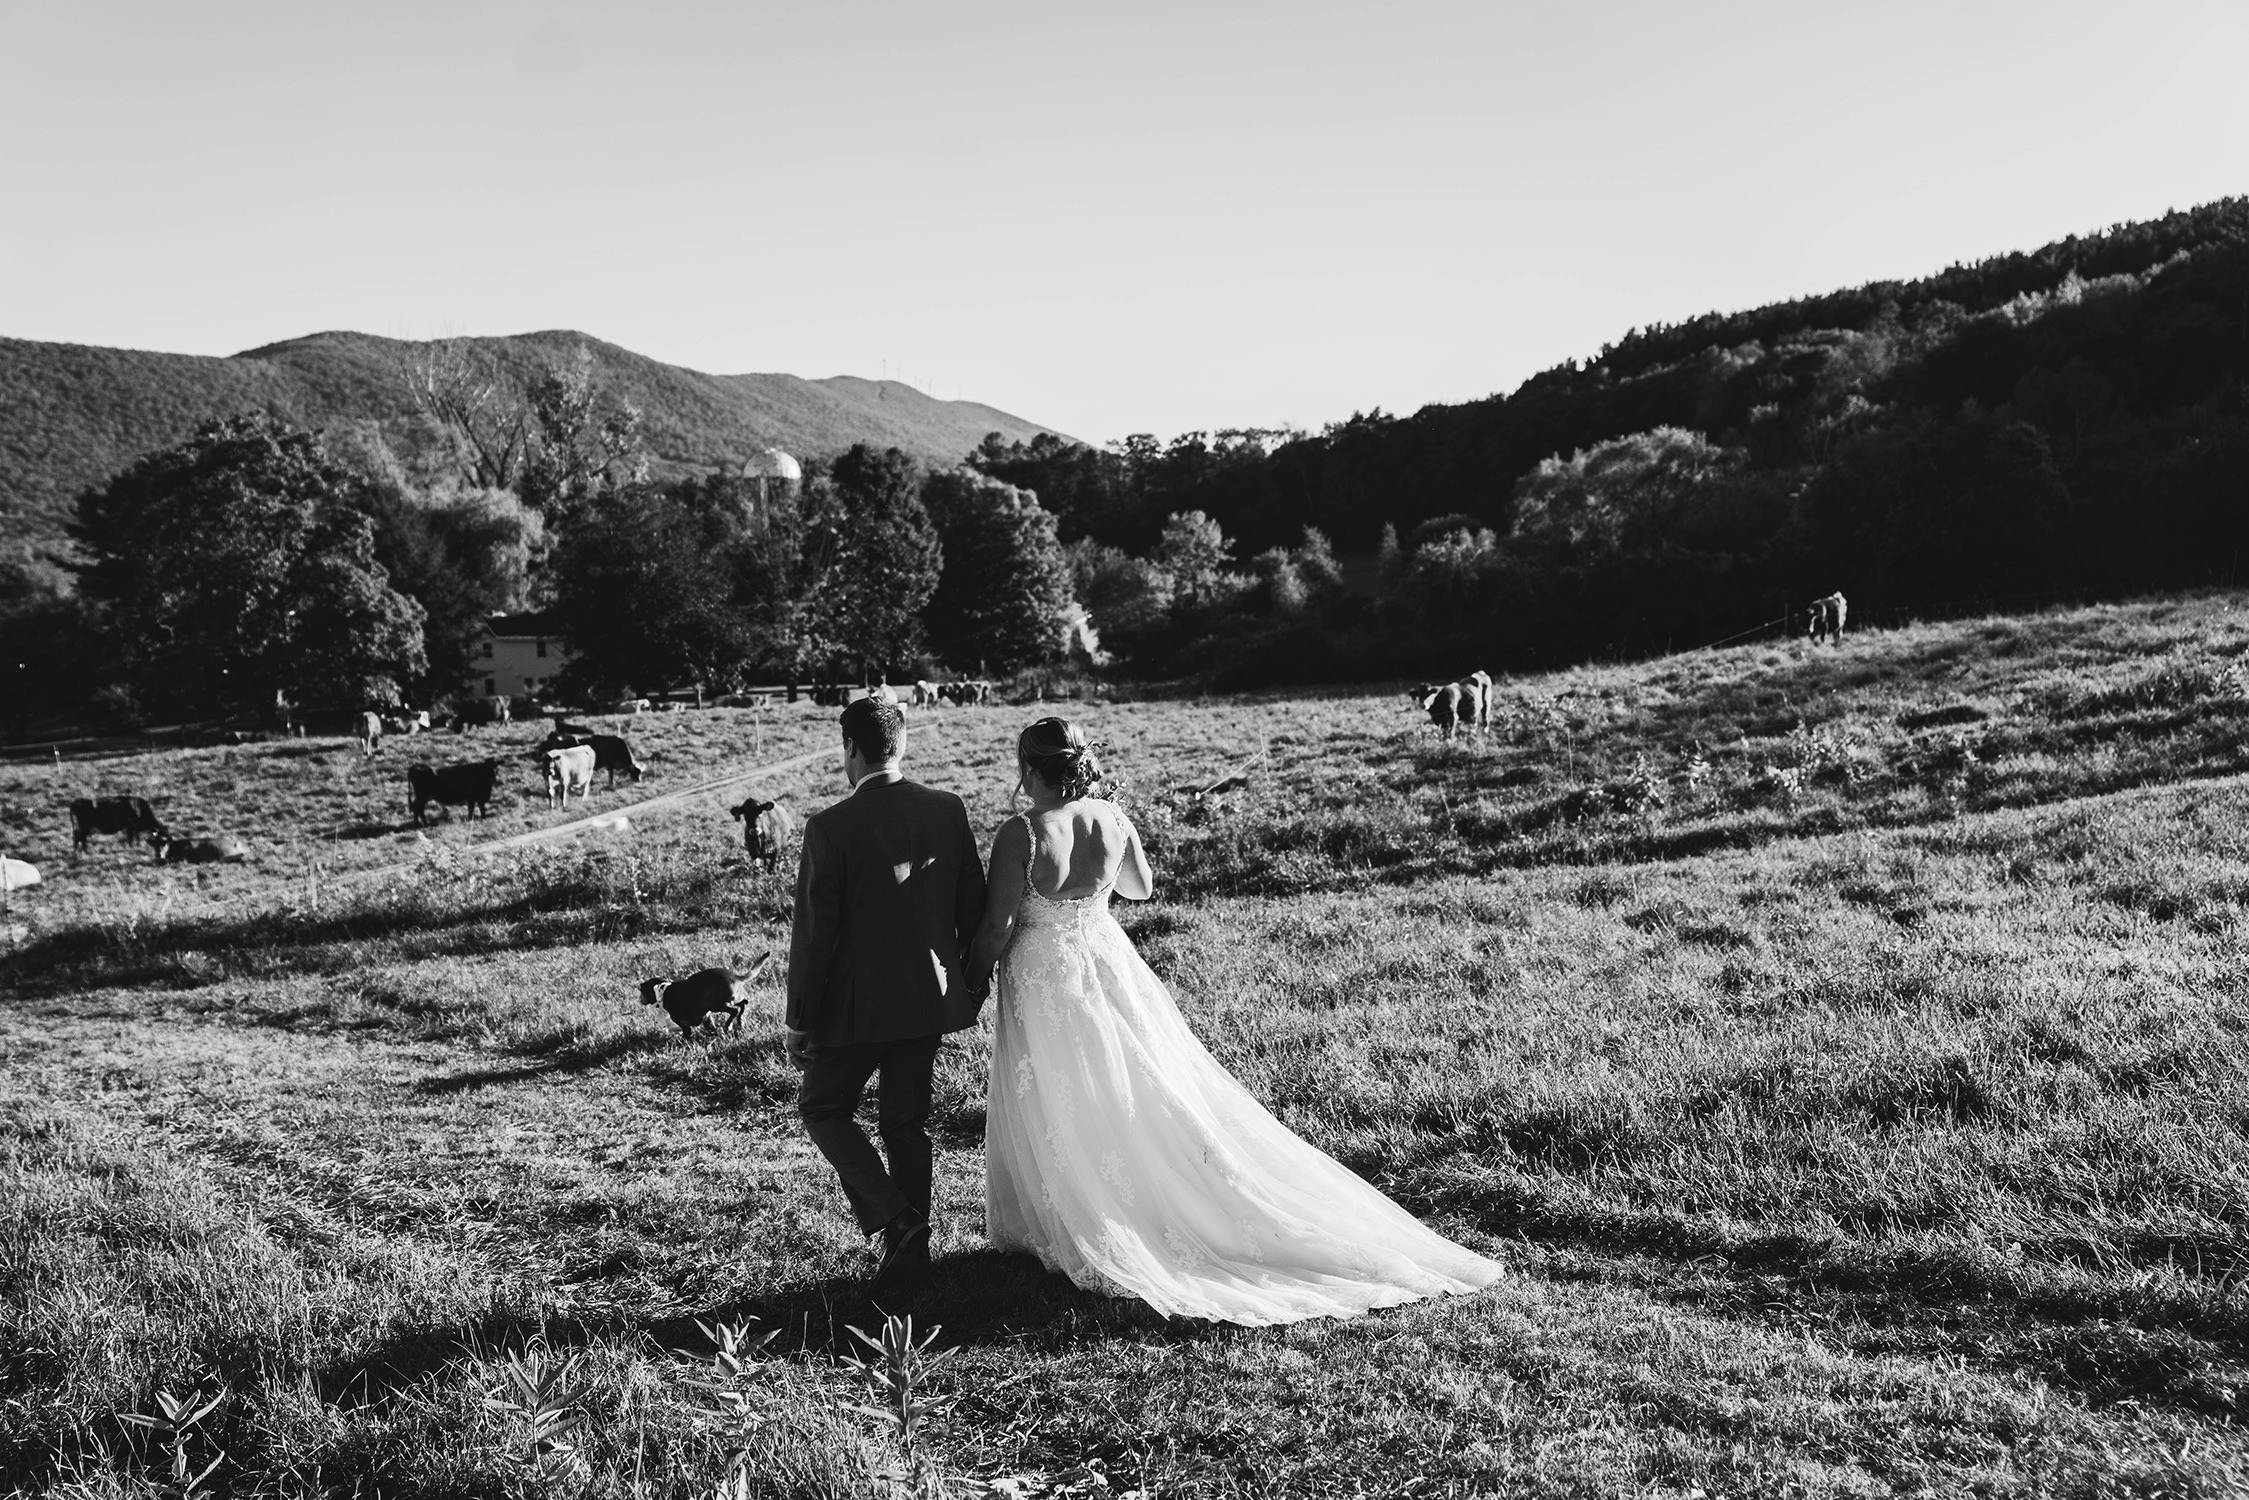 A documentary photograph featured in the best of wedding photography of 2019 showing a couple walking amongst the cows after their outdoor farm ceremony